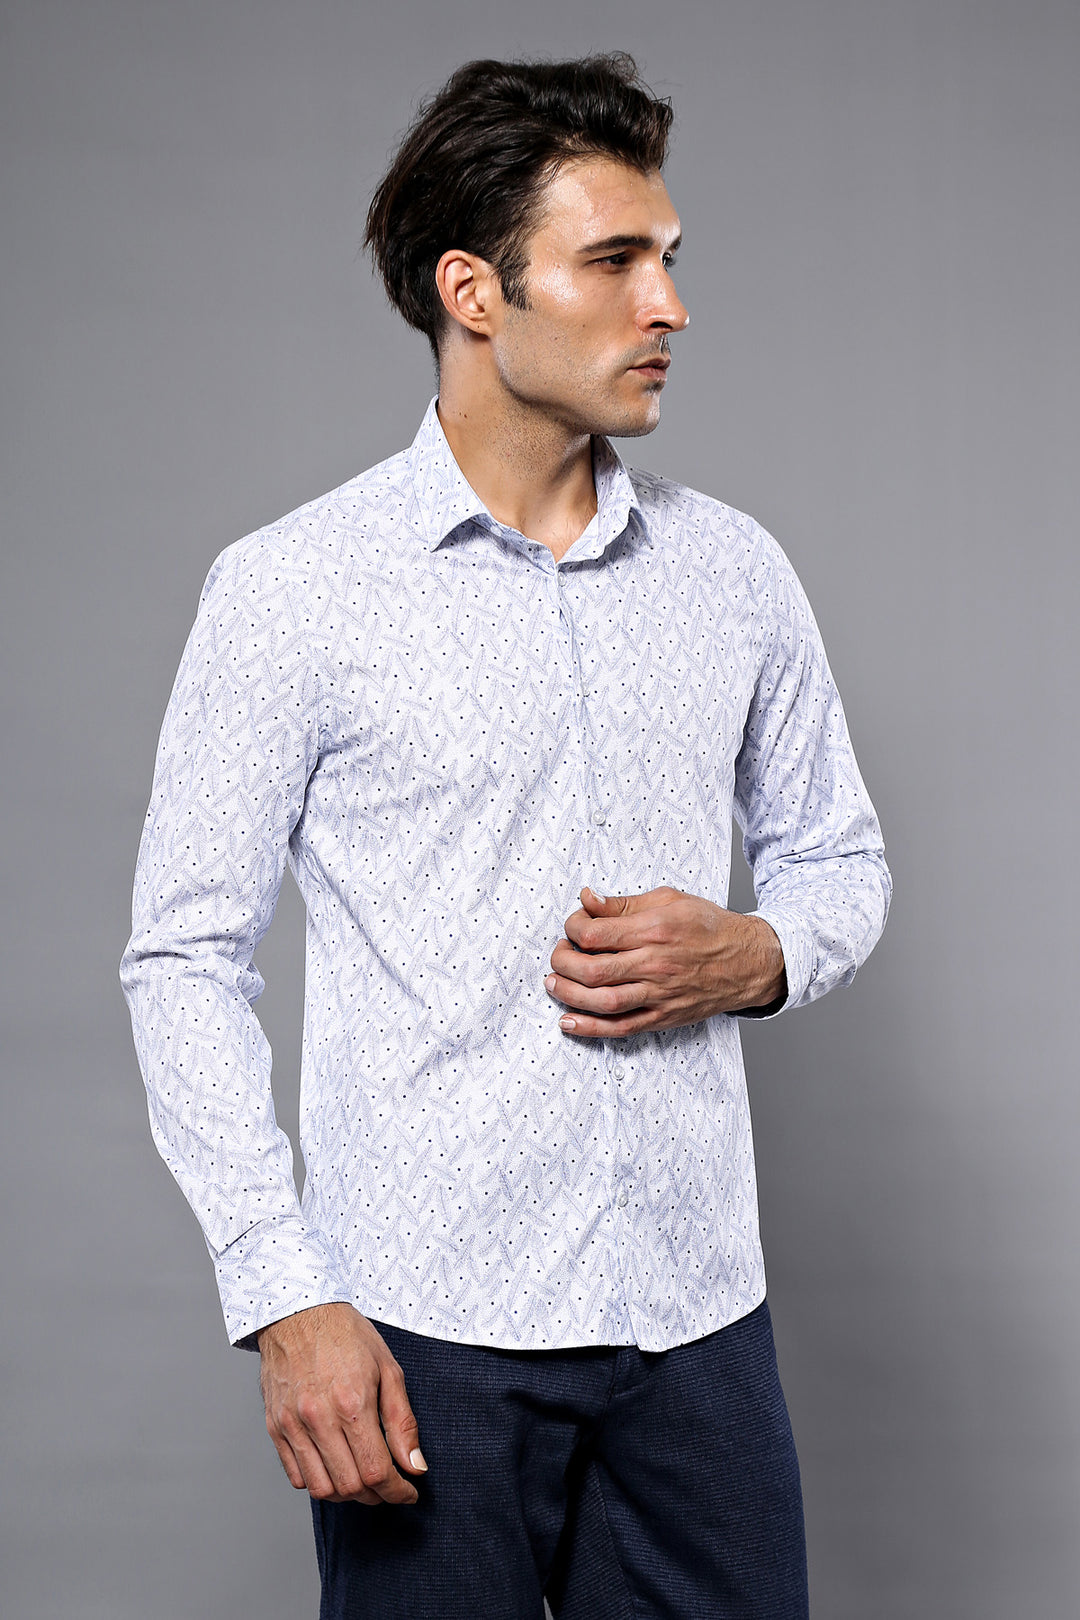 Dot-Patterned White Shirt | Wessi